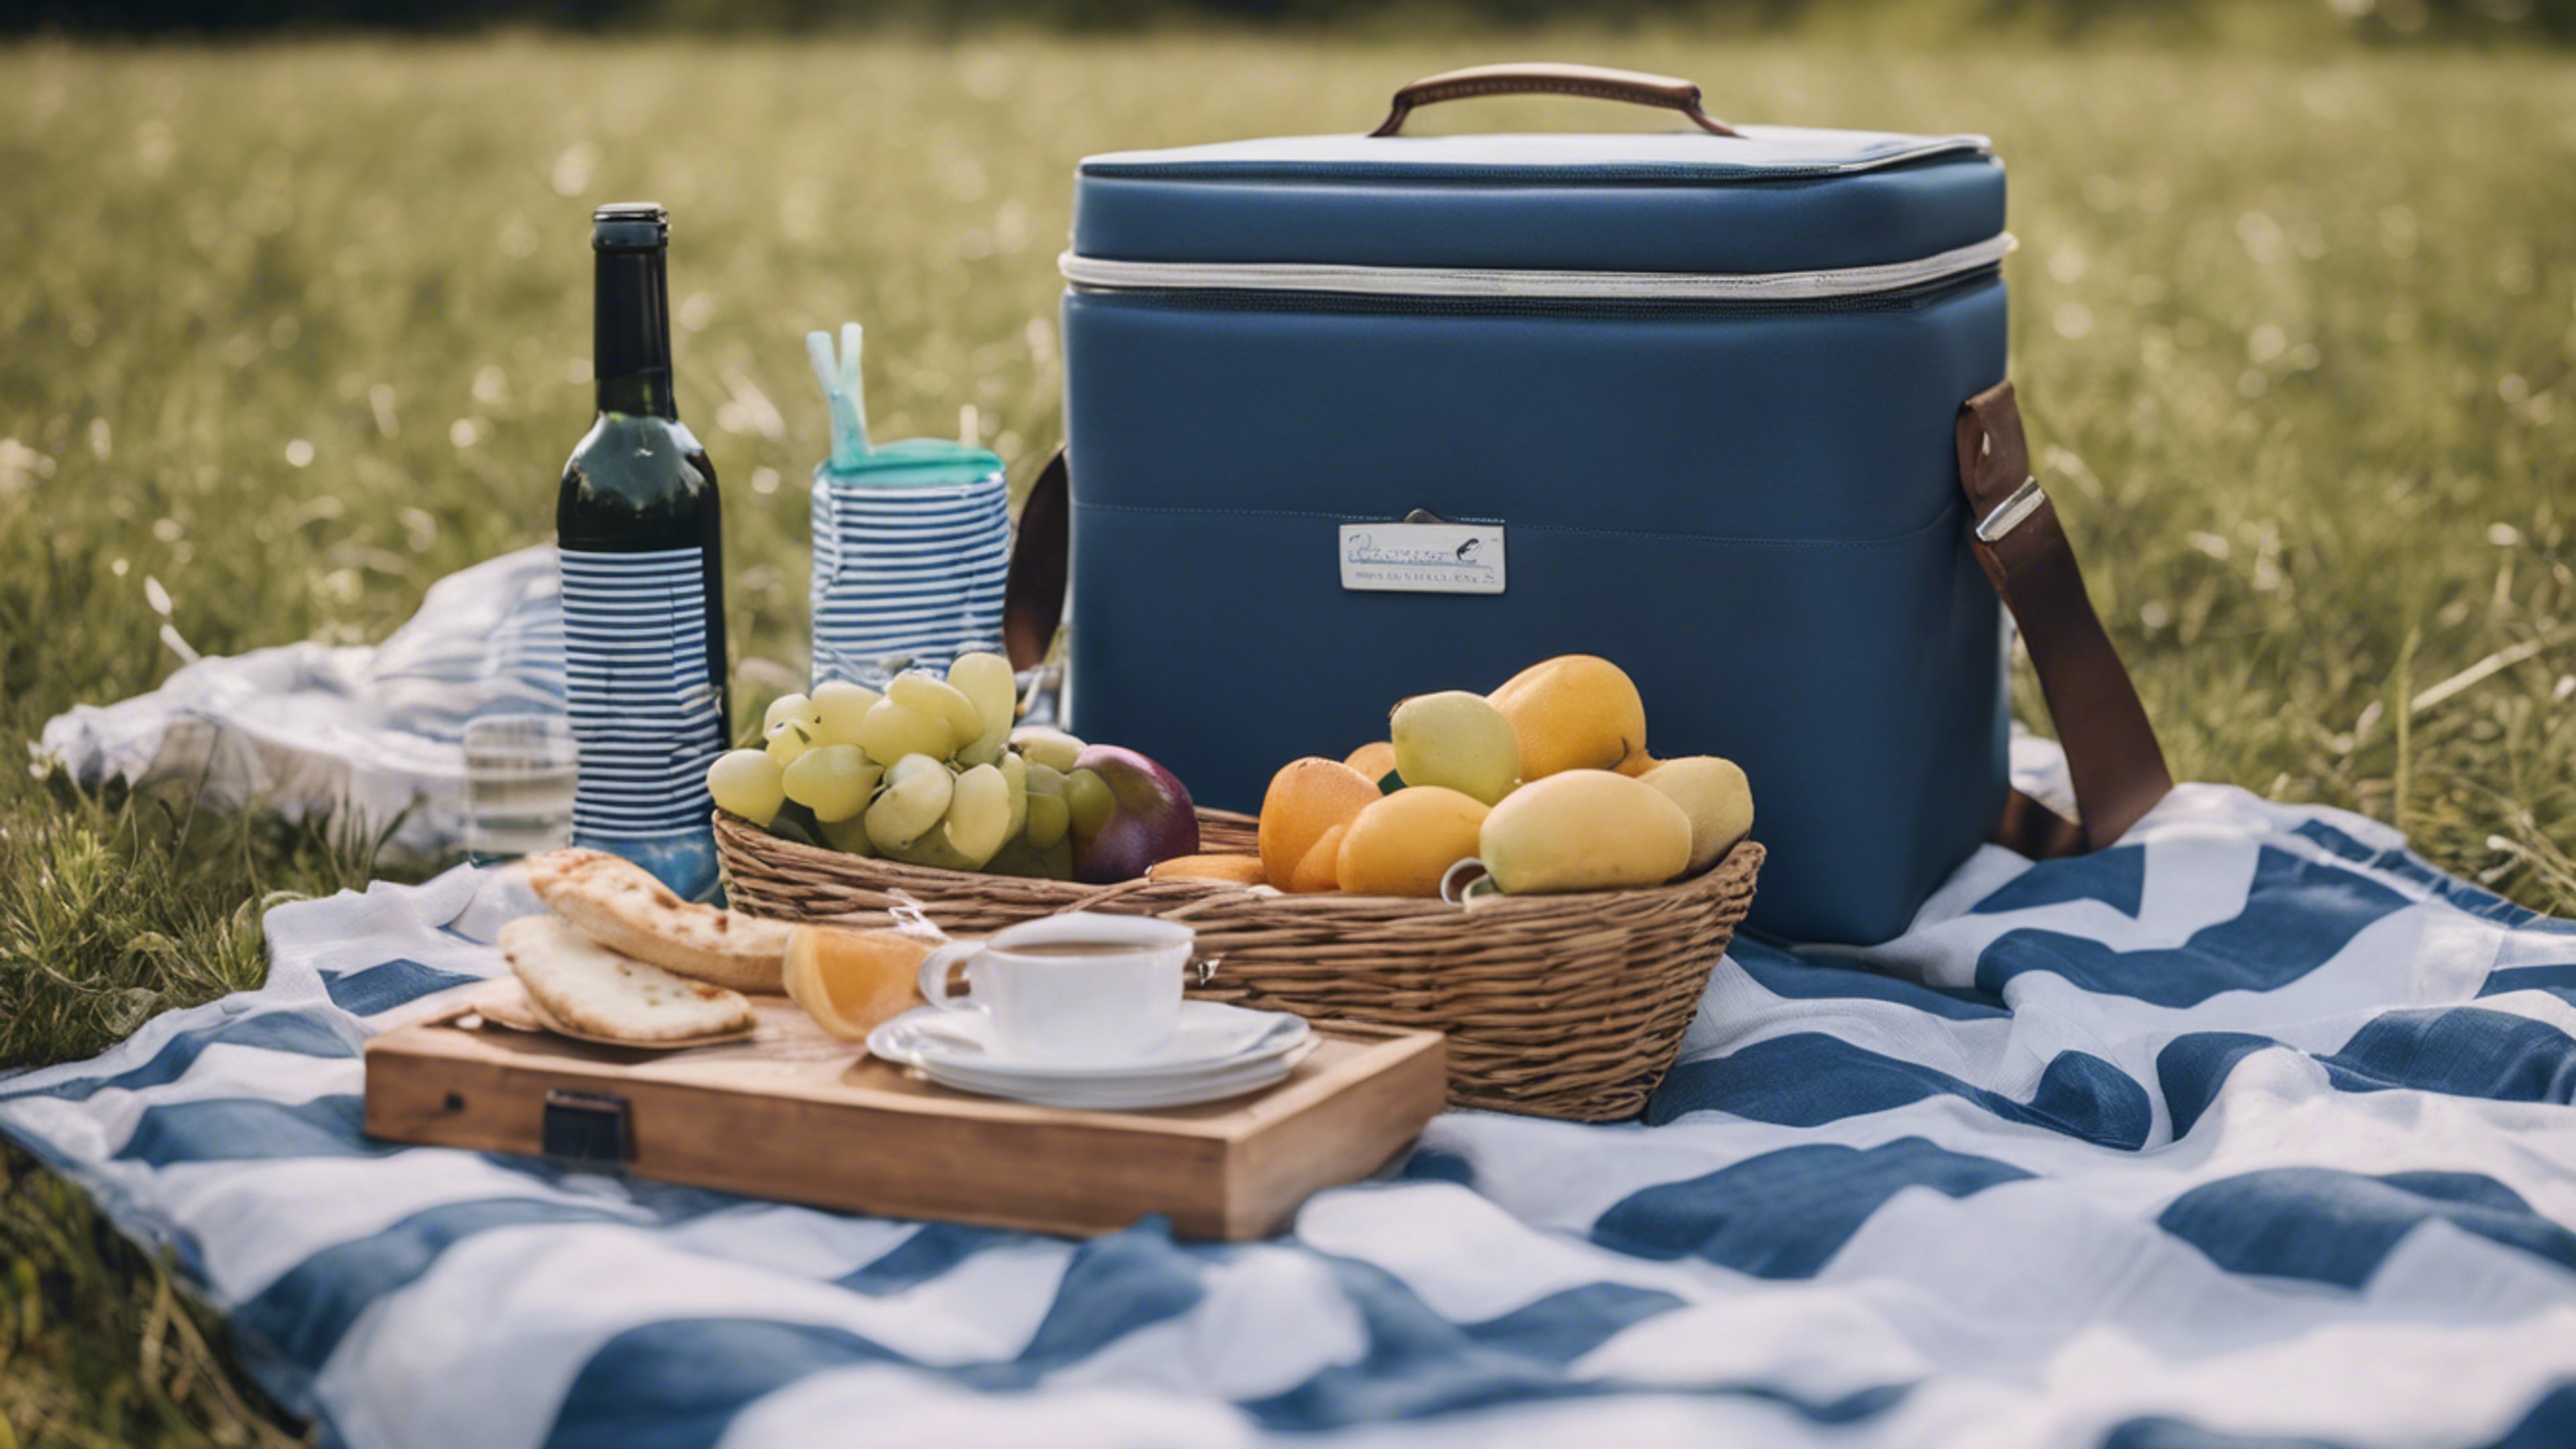 A preppy picnic setup in a grassy meadow, featuring a blue and white striped picnic blanket and matching cooler.壁紙[2c3aa7a20c924d6f9450]